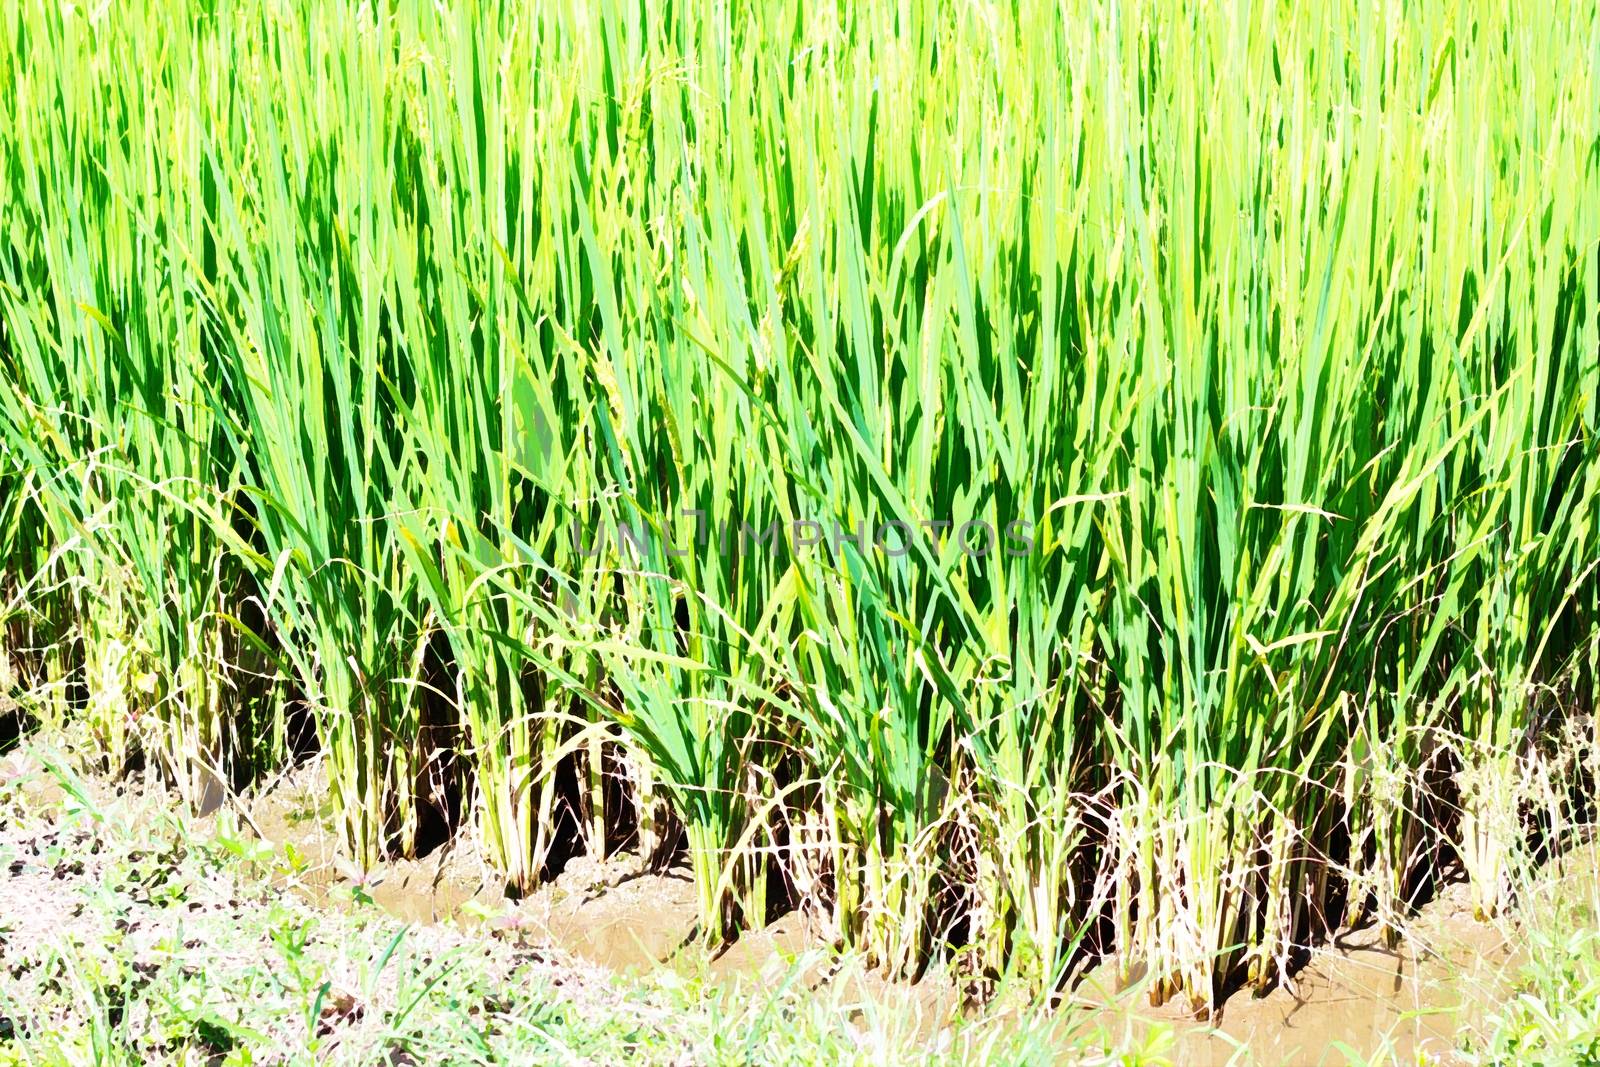 Close-up rice plants in rice field by a3701027